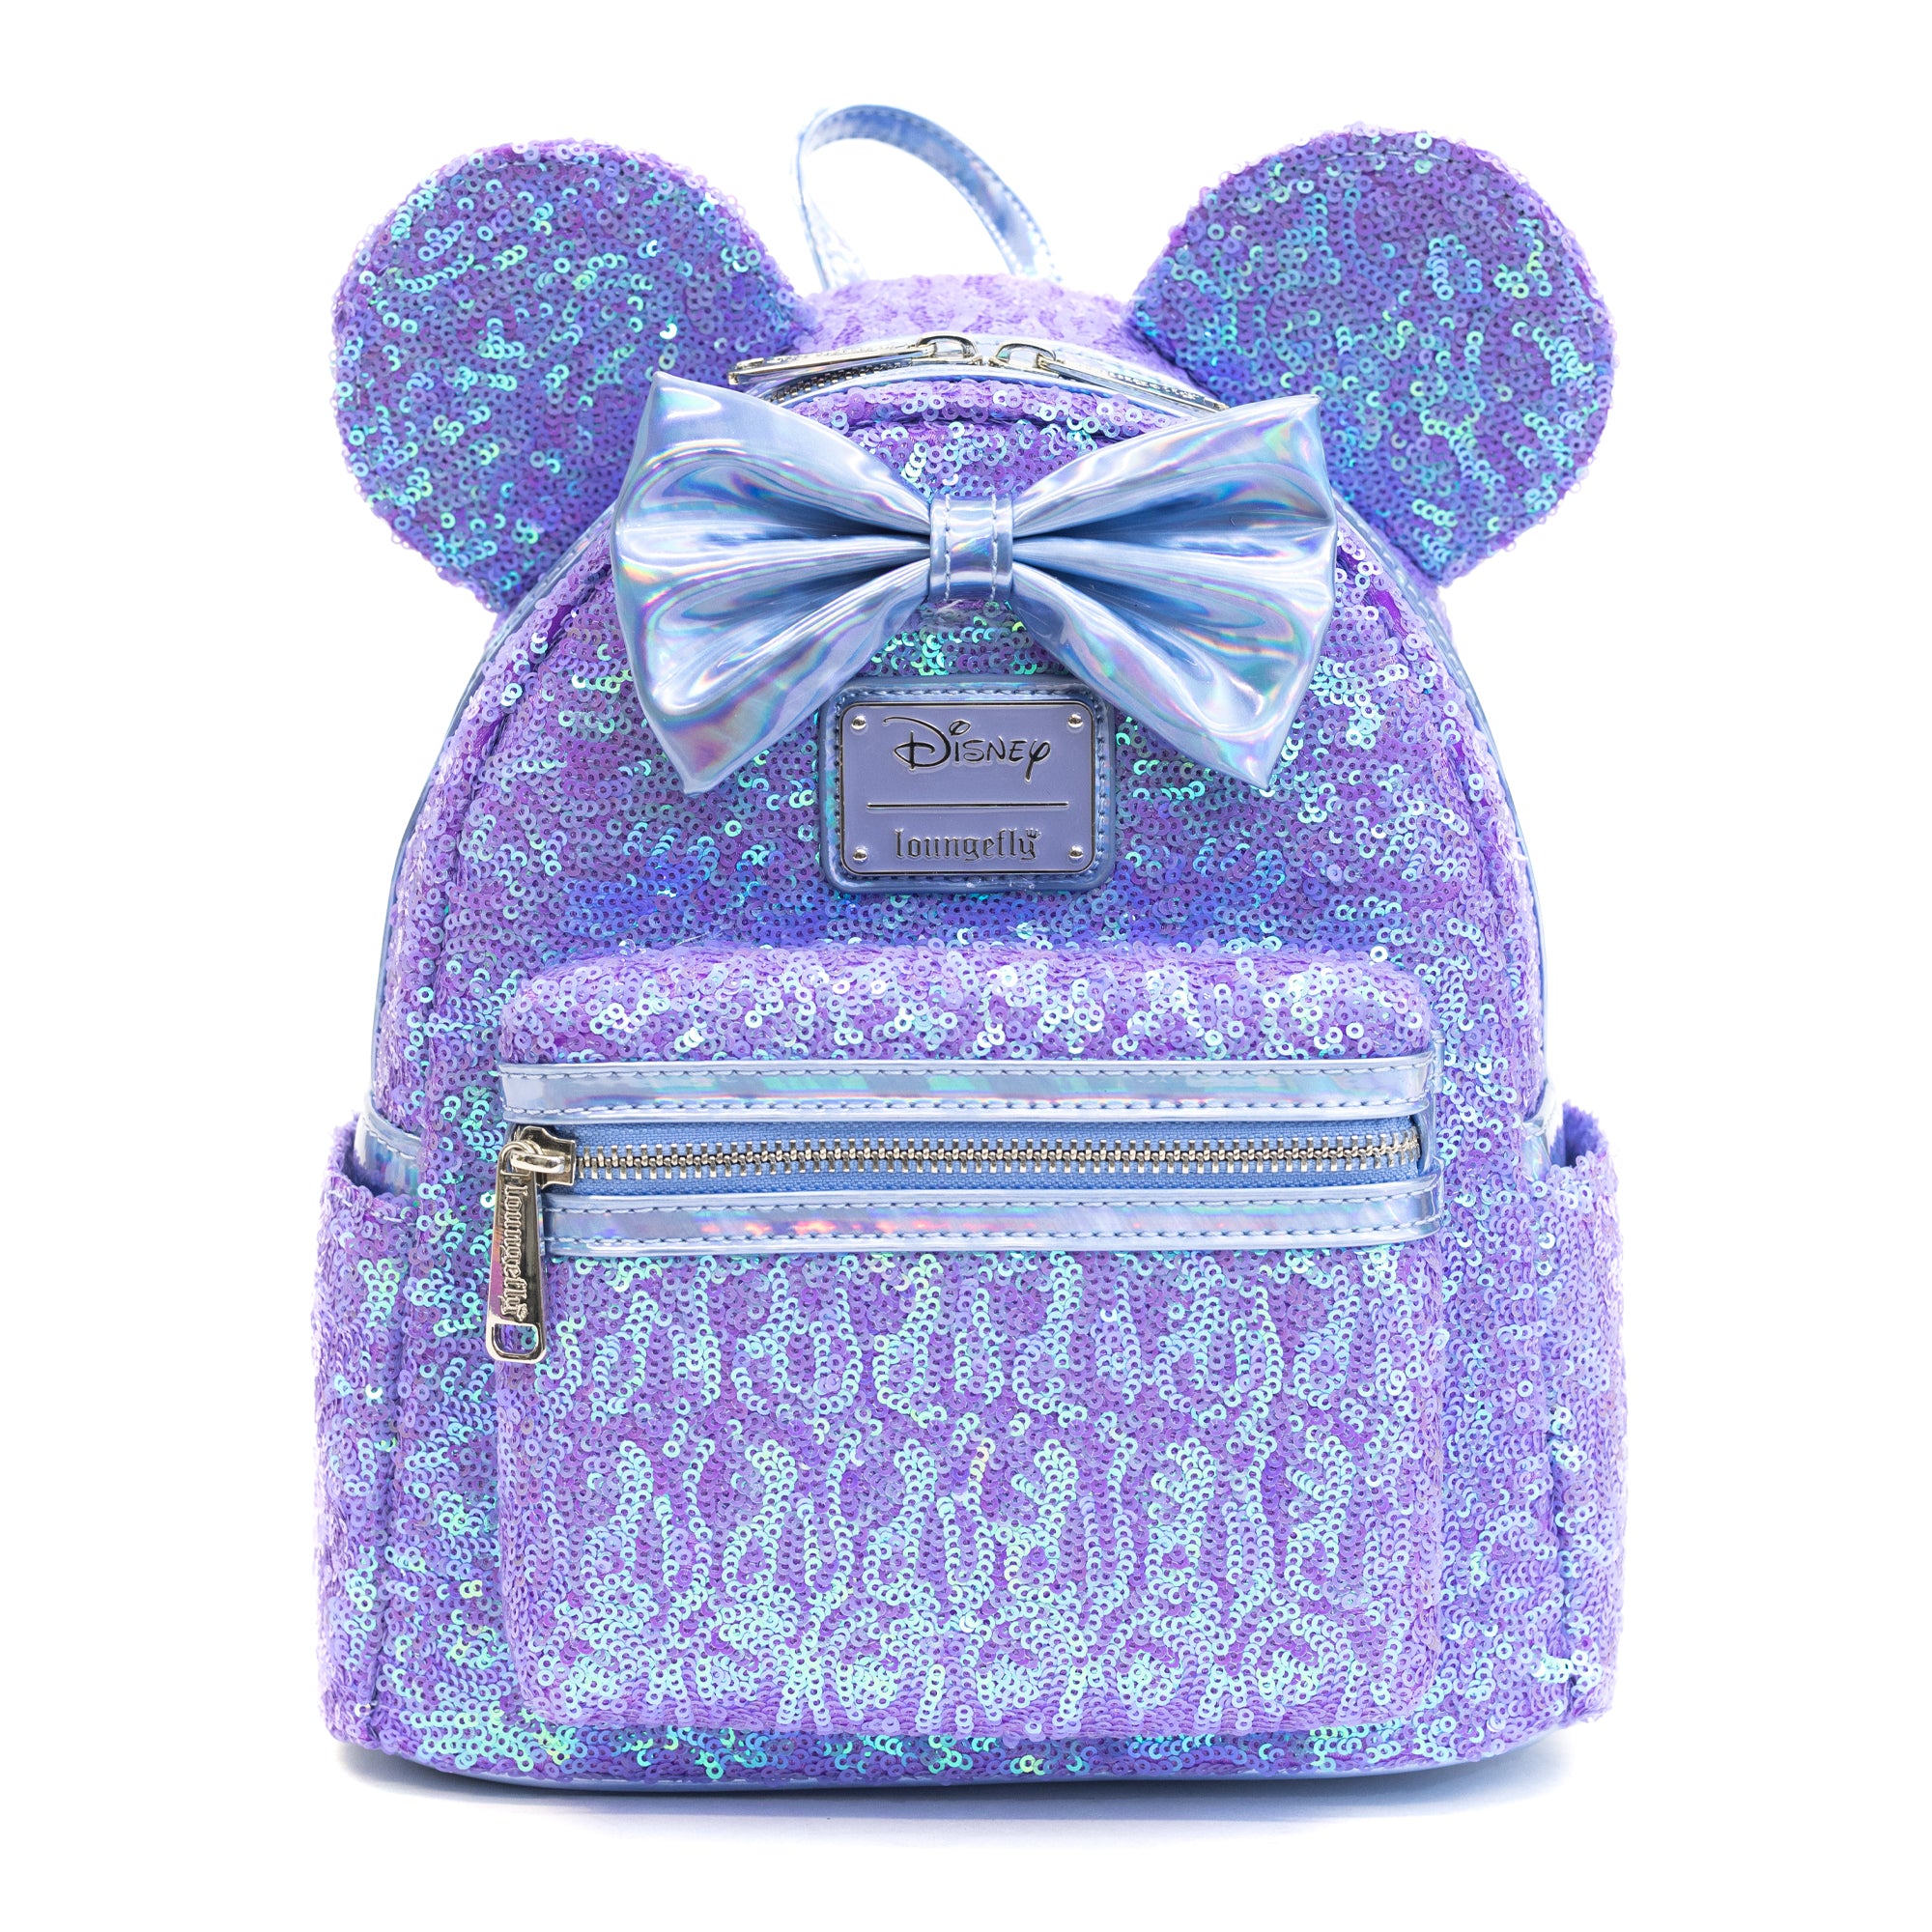 Loungefly - Disney Minnie Mouse Sequin Celebration Mini Backpack - NEW RELEASE